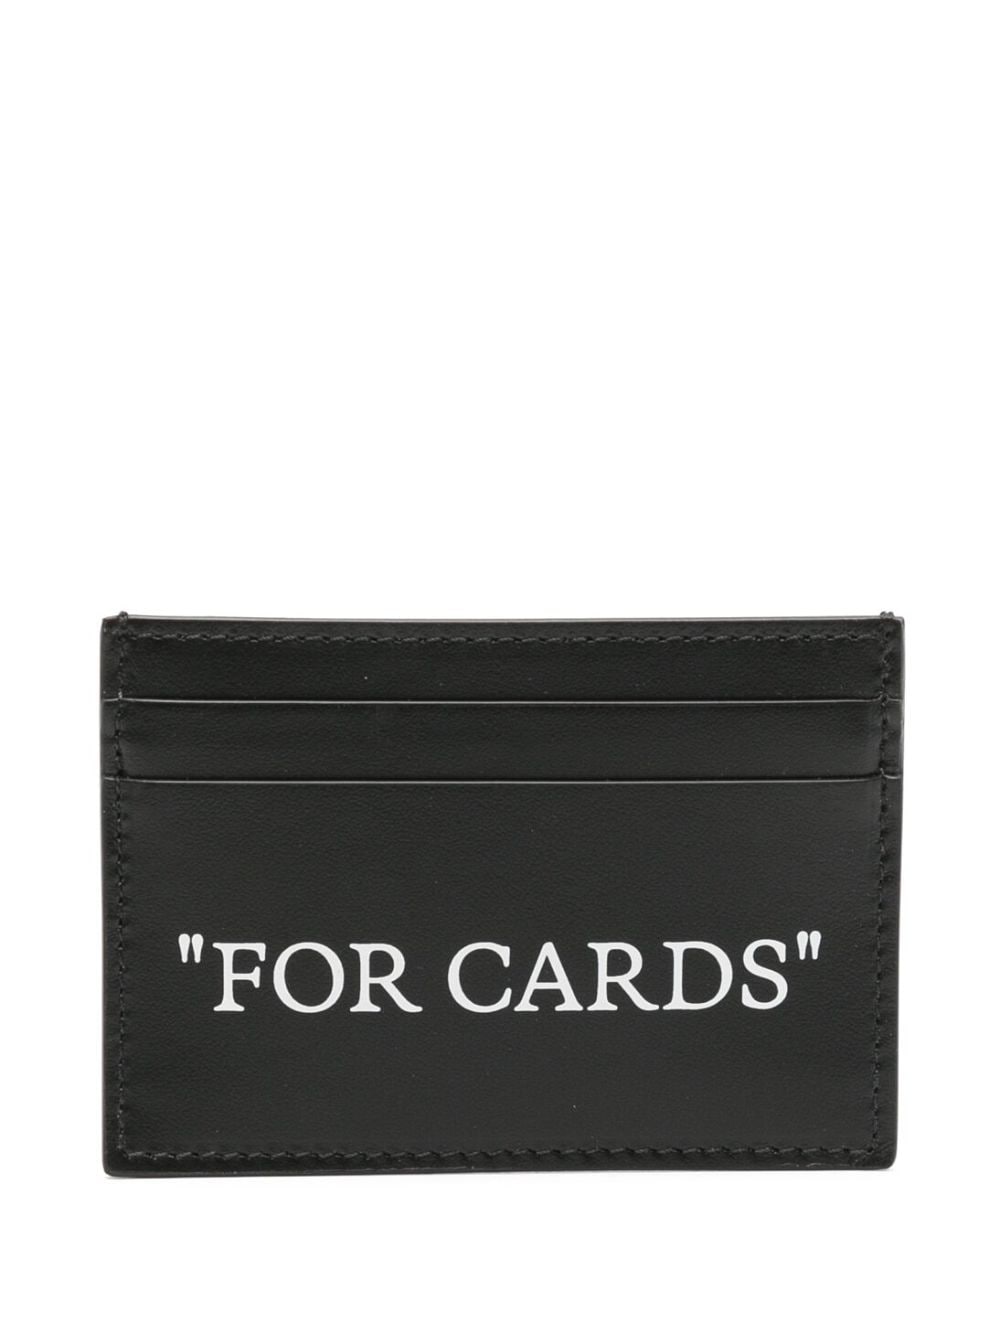 Quote Bookish leather cardholder